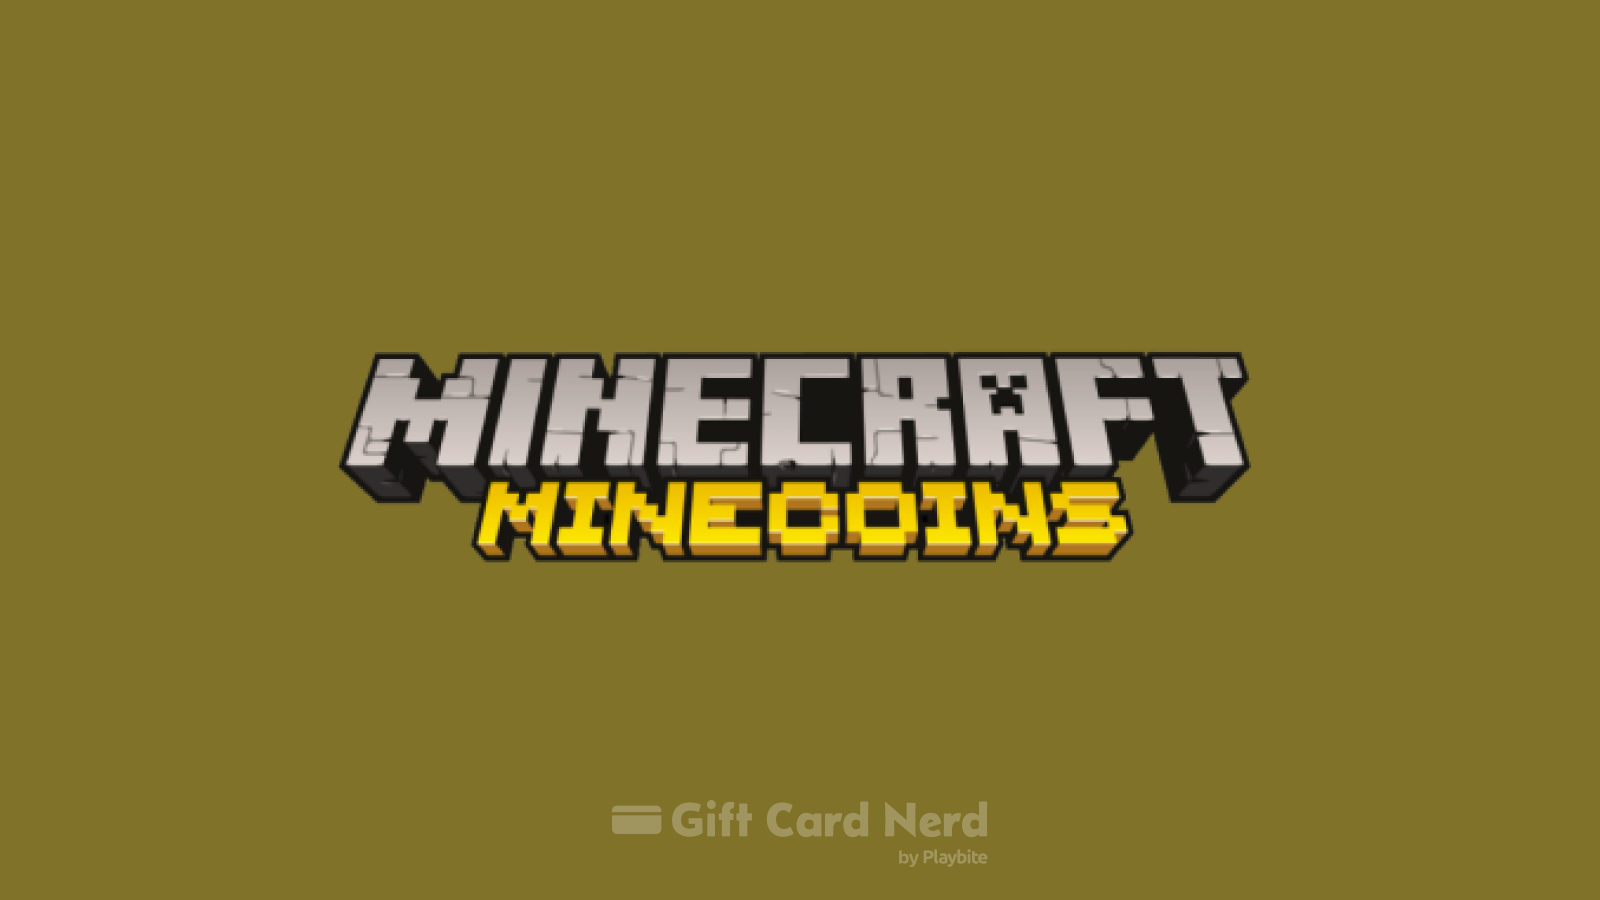 Does Walmart Sell Minecraft Gift Cards?